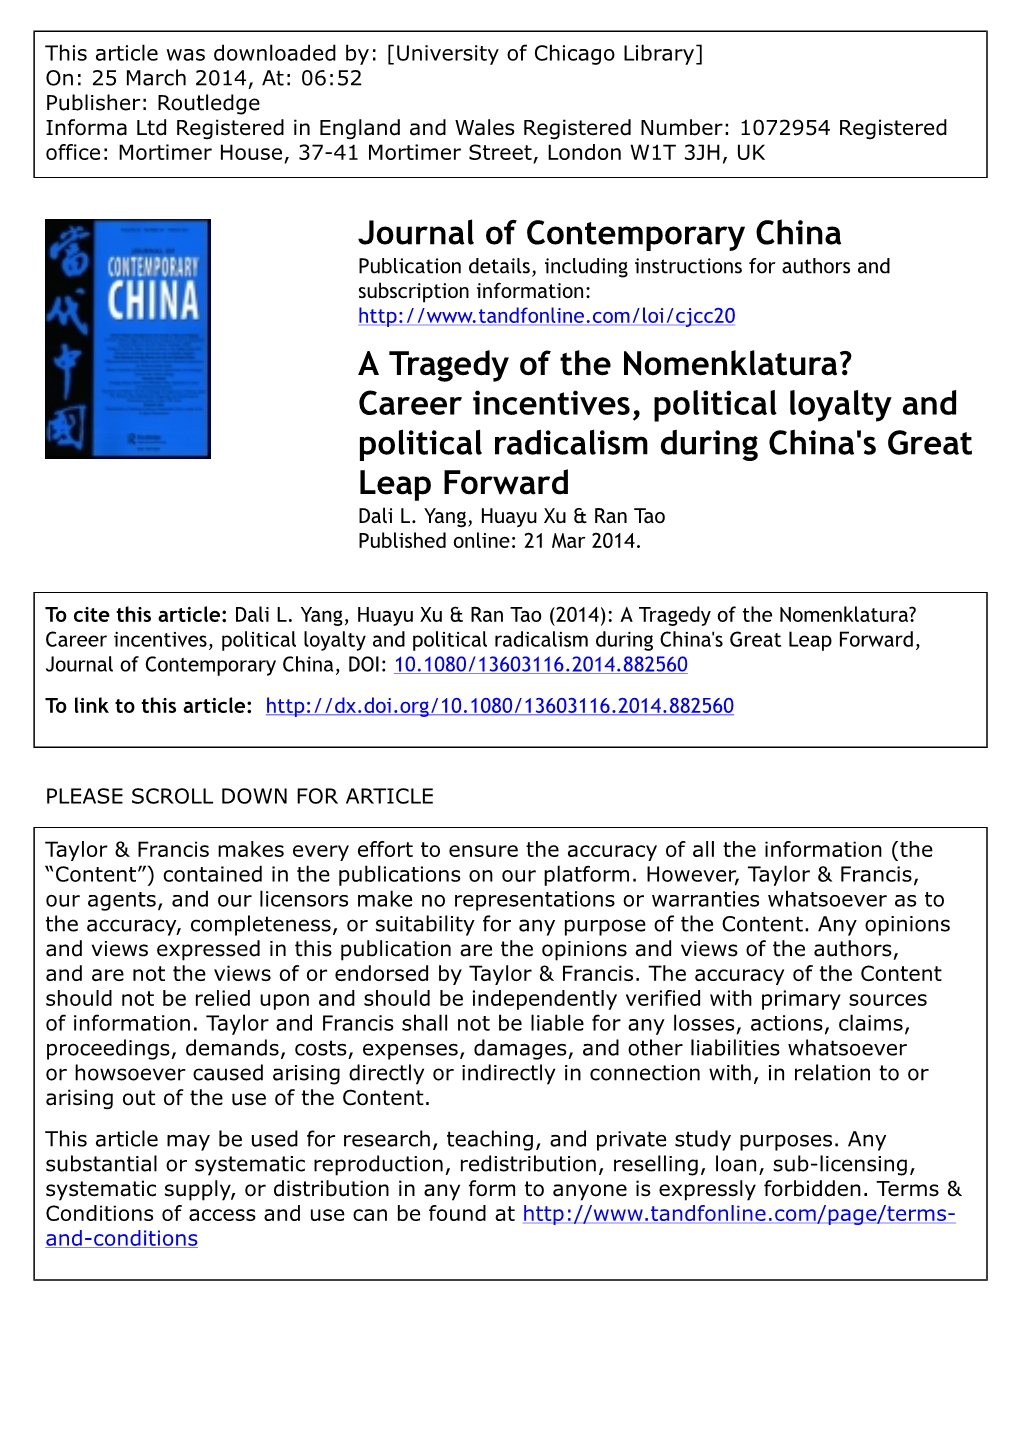 Journal of Contemporary China a Tragedy of the Nomenklatura